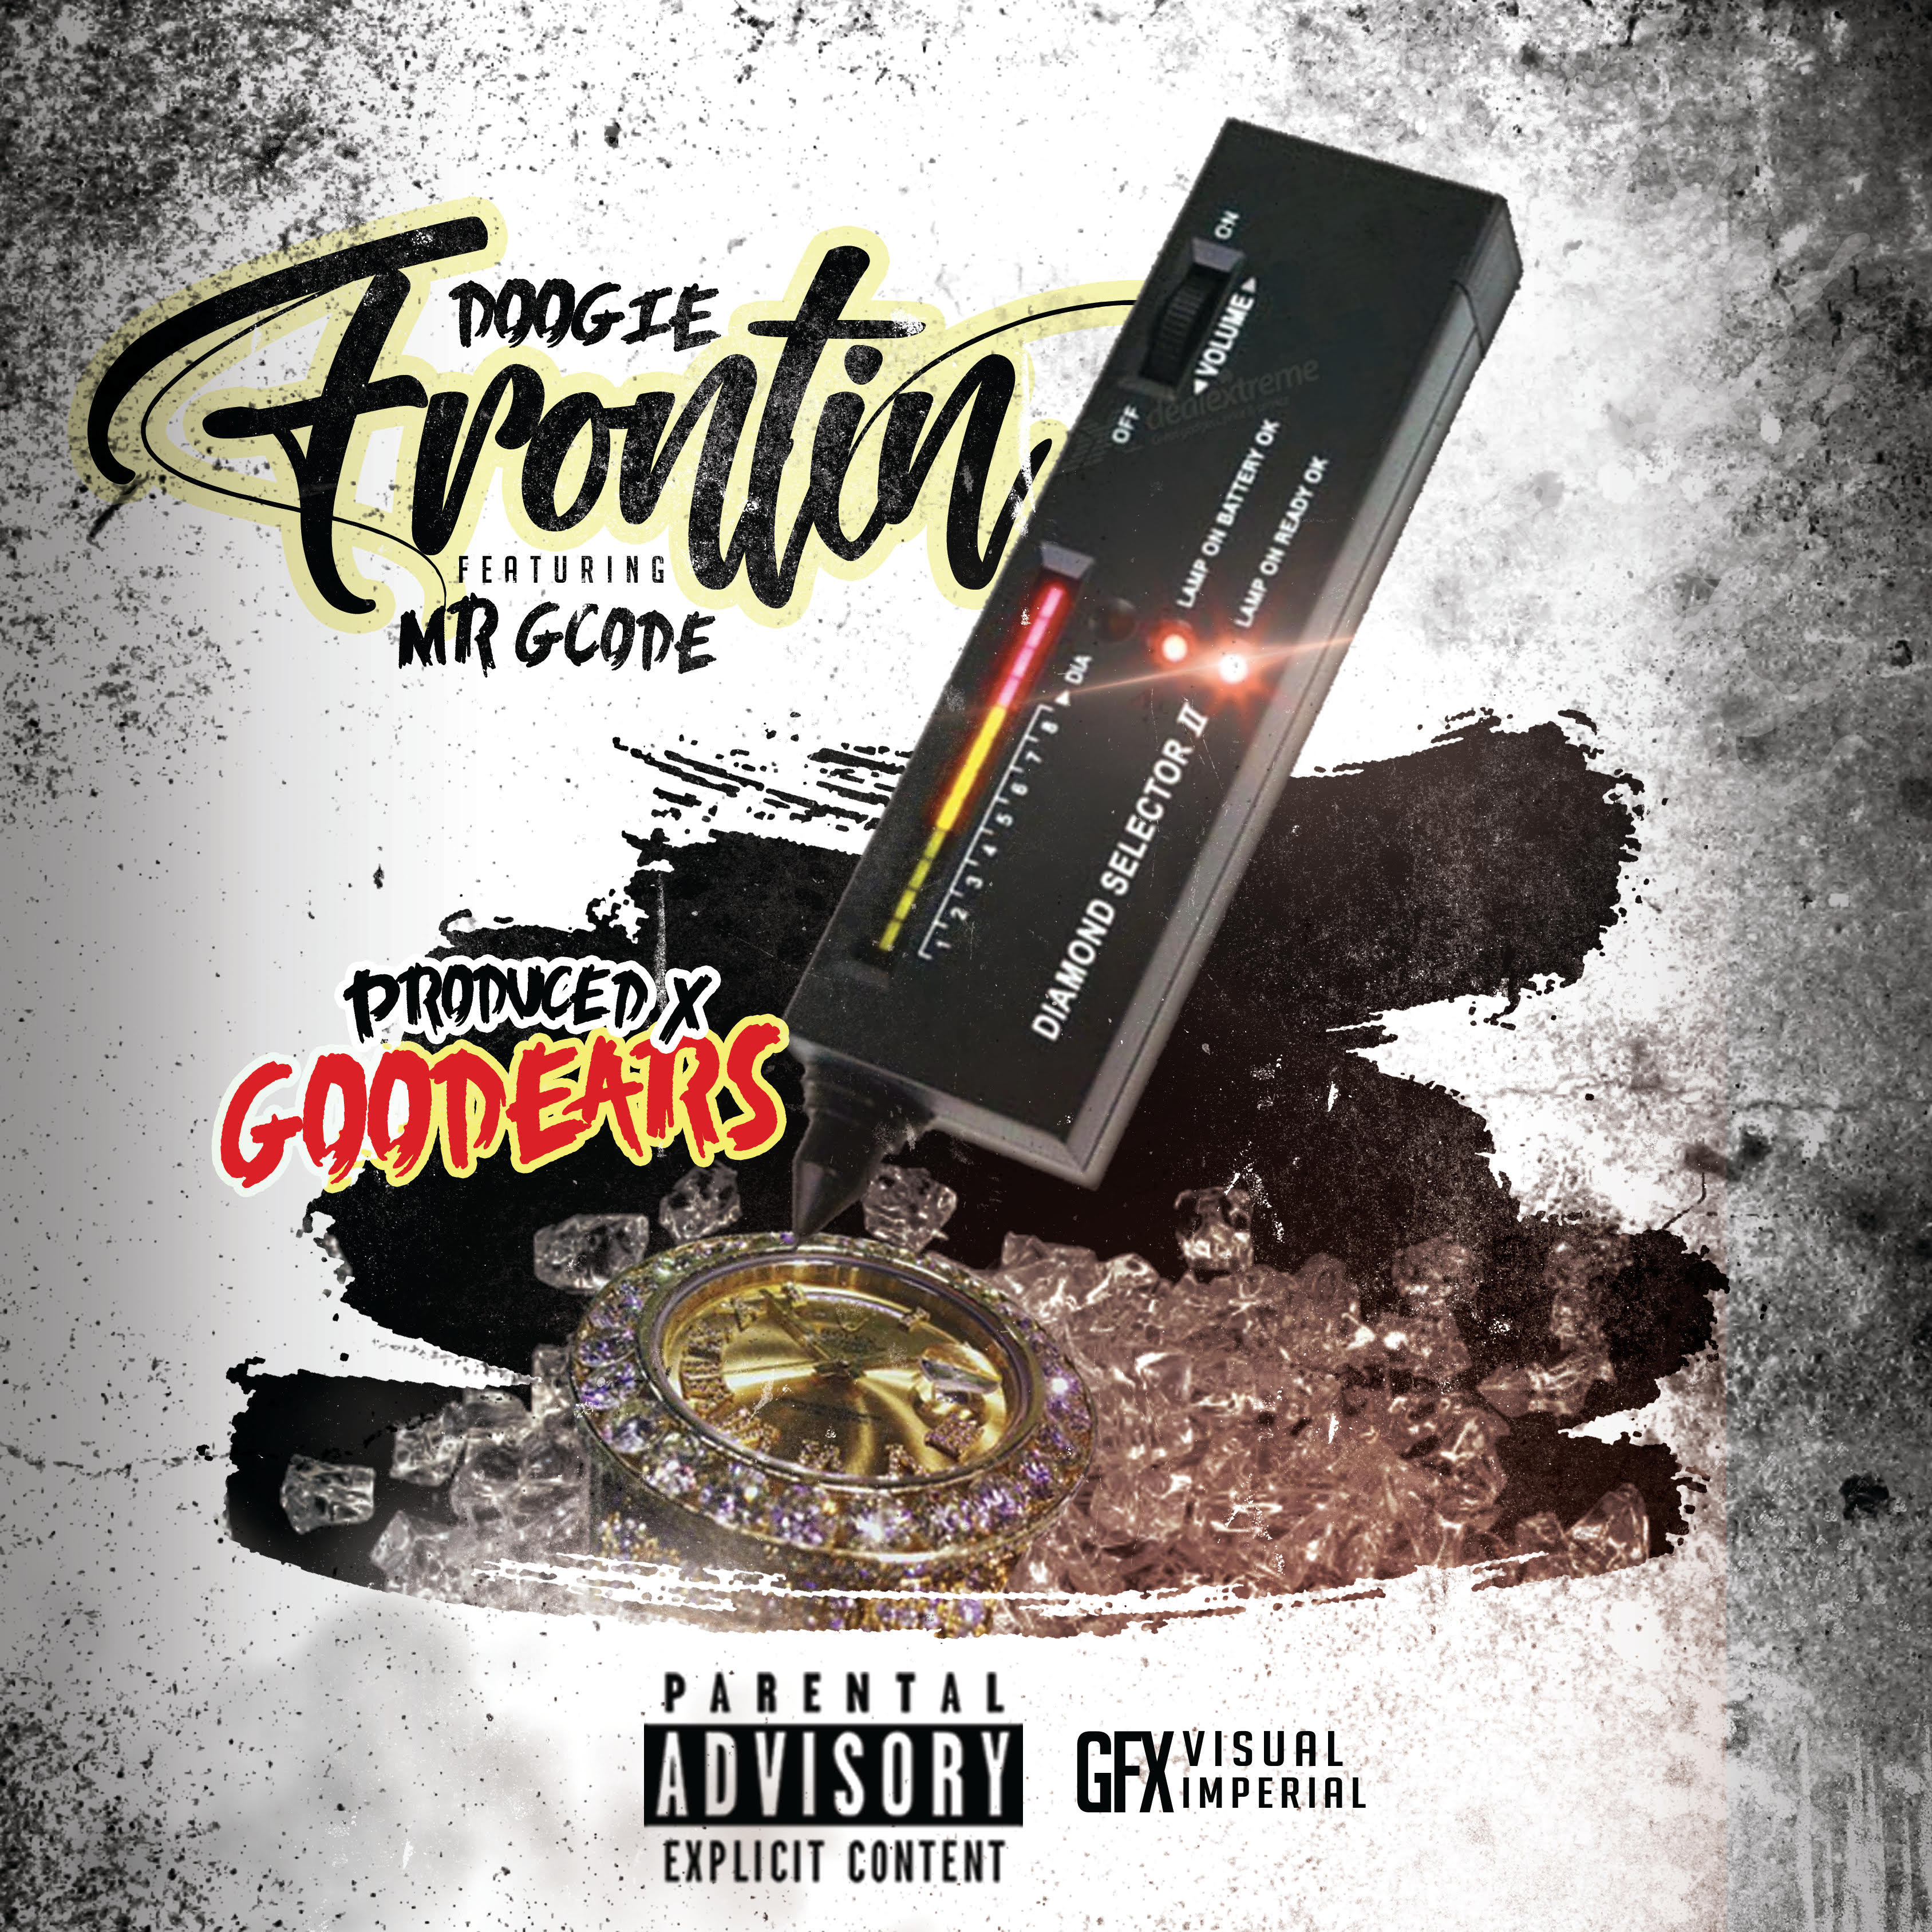 New Music: Goodears Streaming Presents Doogie Feat Mr. G Code “Frontin”